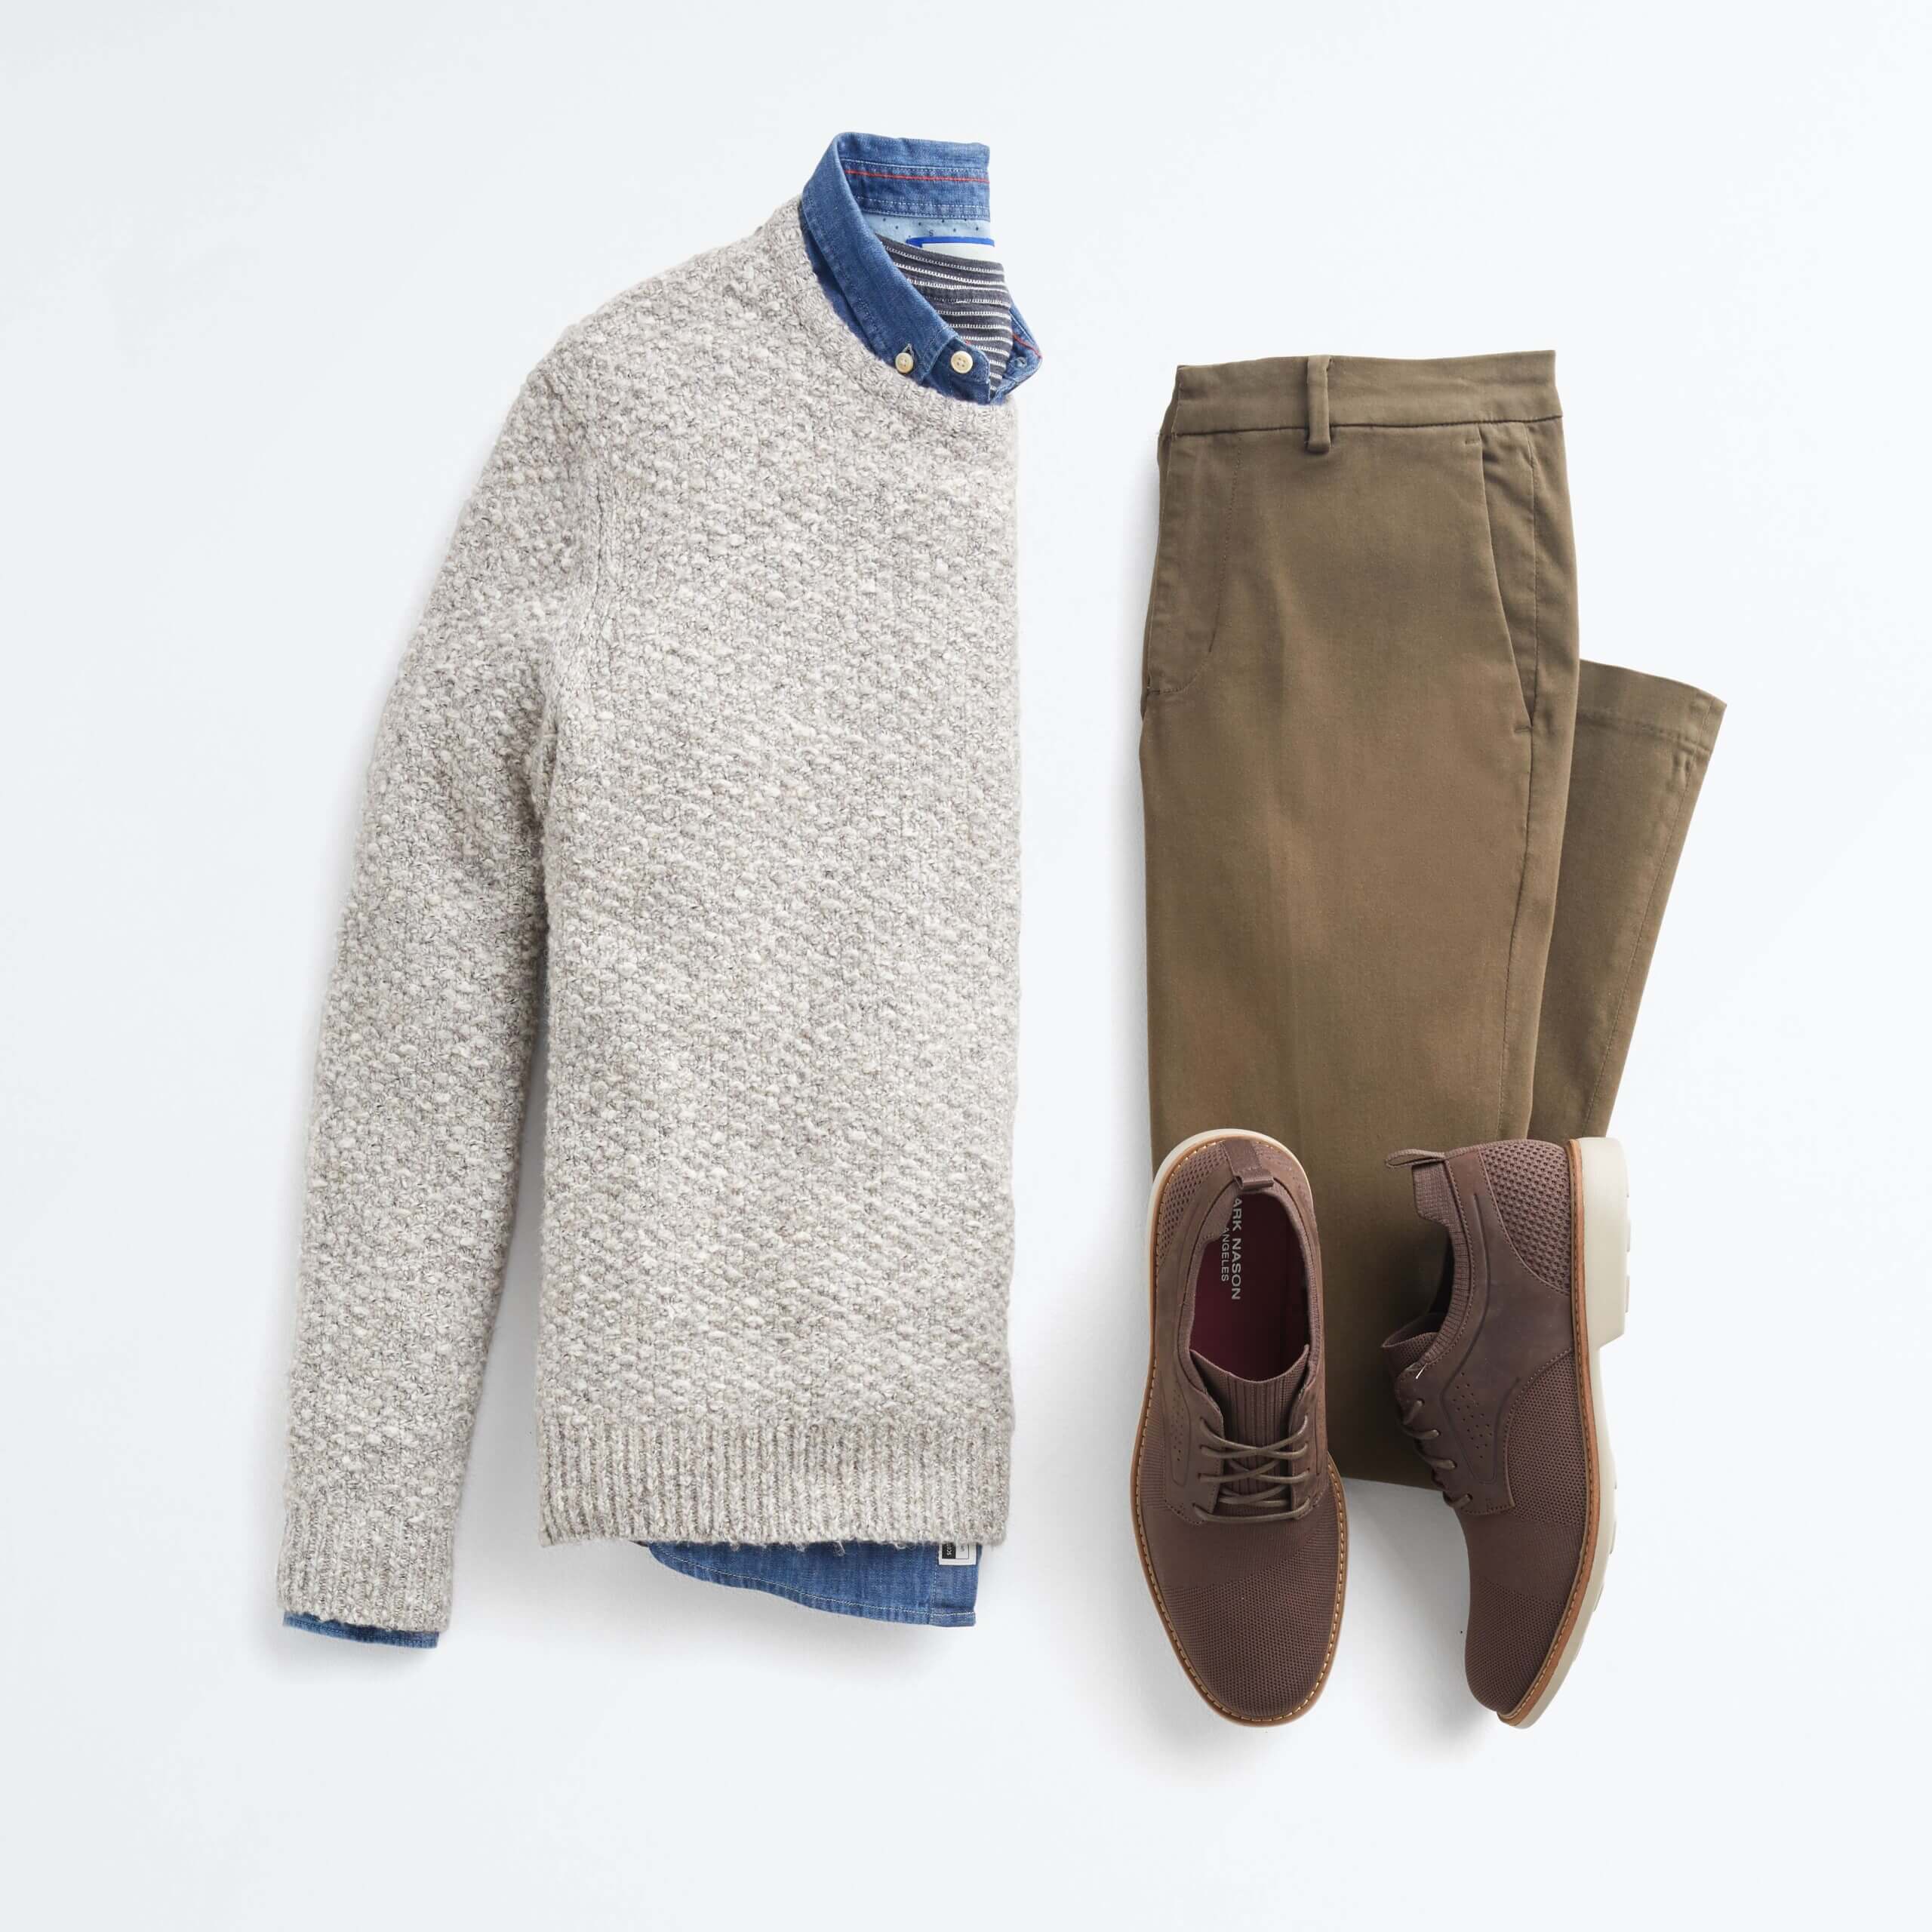 Stitch Fix men’s preppy style outfit featuring blue button-down shirt layered under a grey sweater, olive chinos and brown leather shoes.